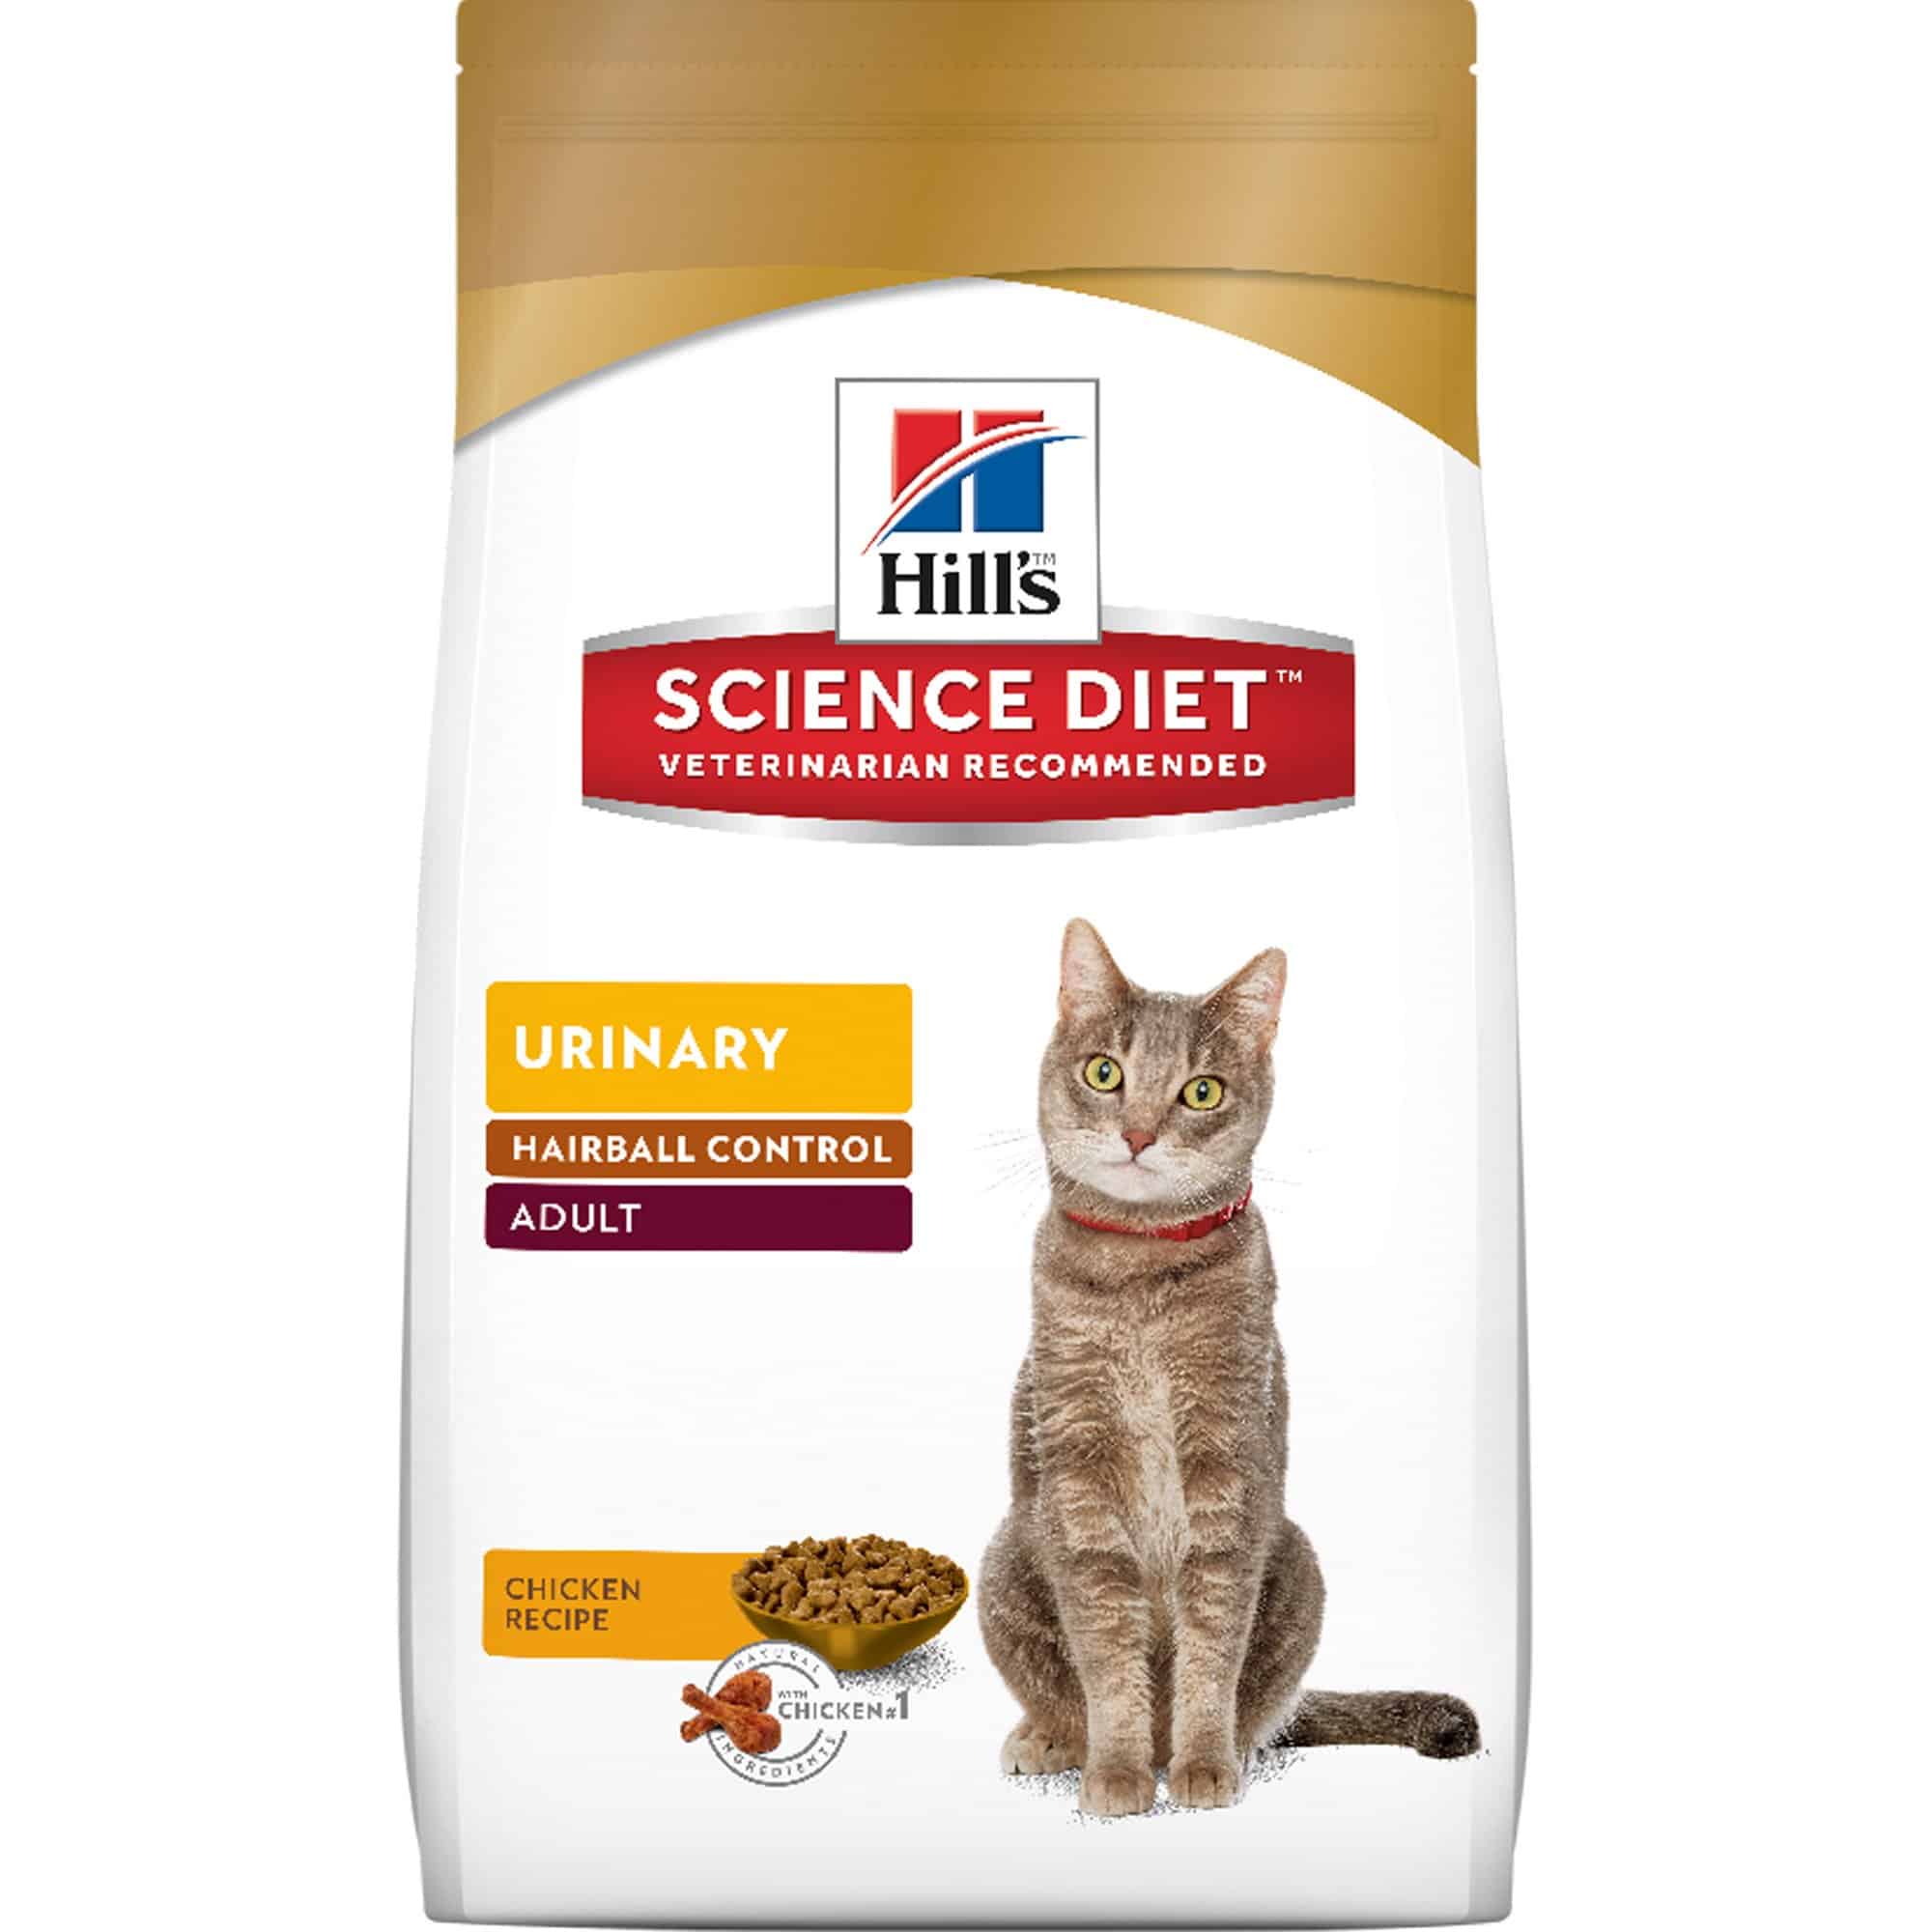 Science Diet Urinary Hairball Control Adult 3.5lb